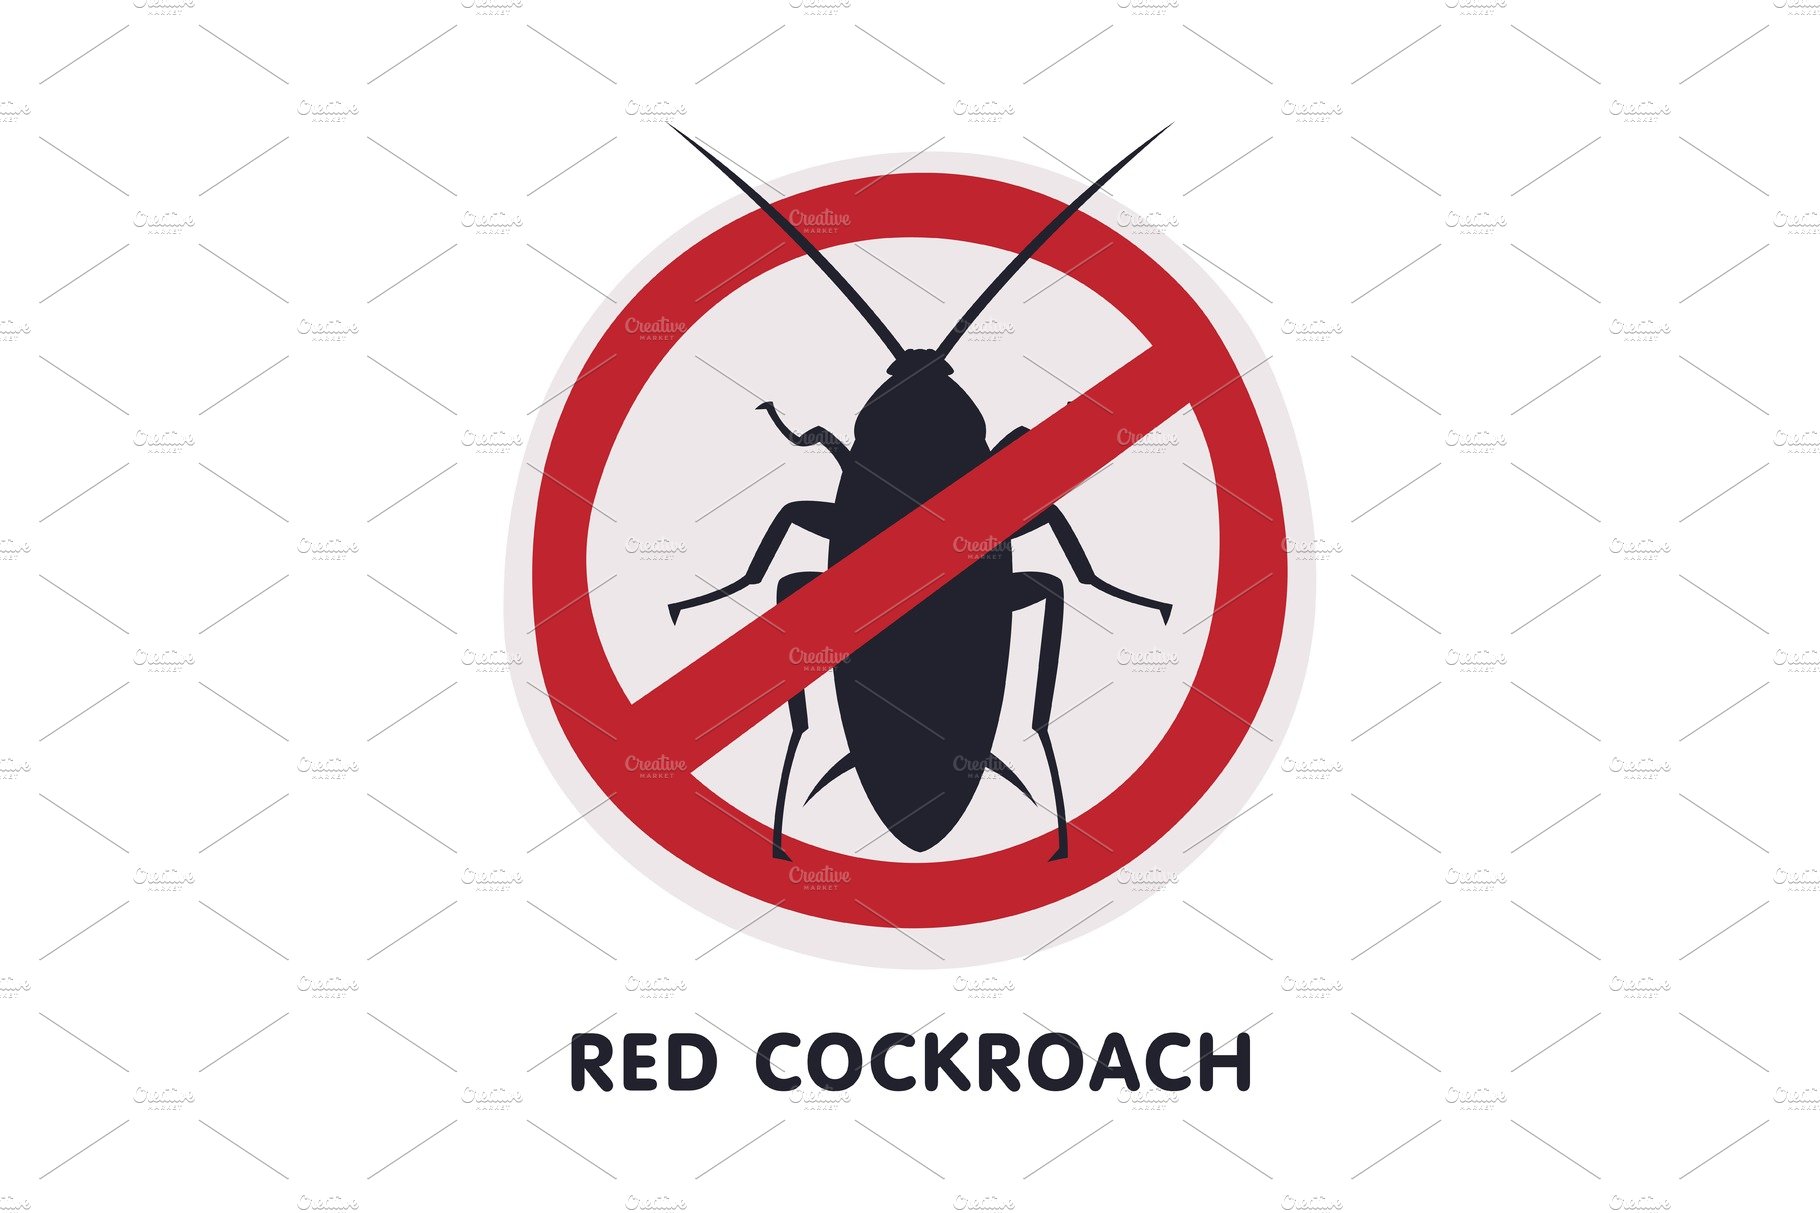 Red Cockroach Harmful Insect cover image.